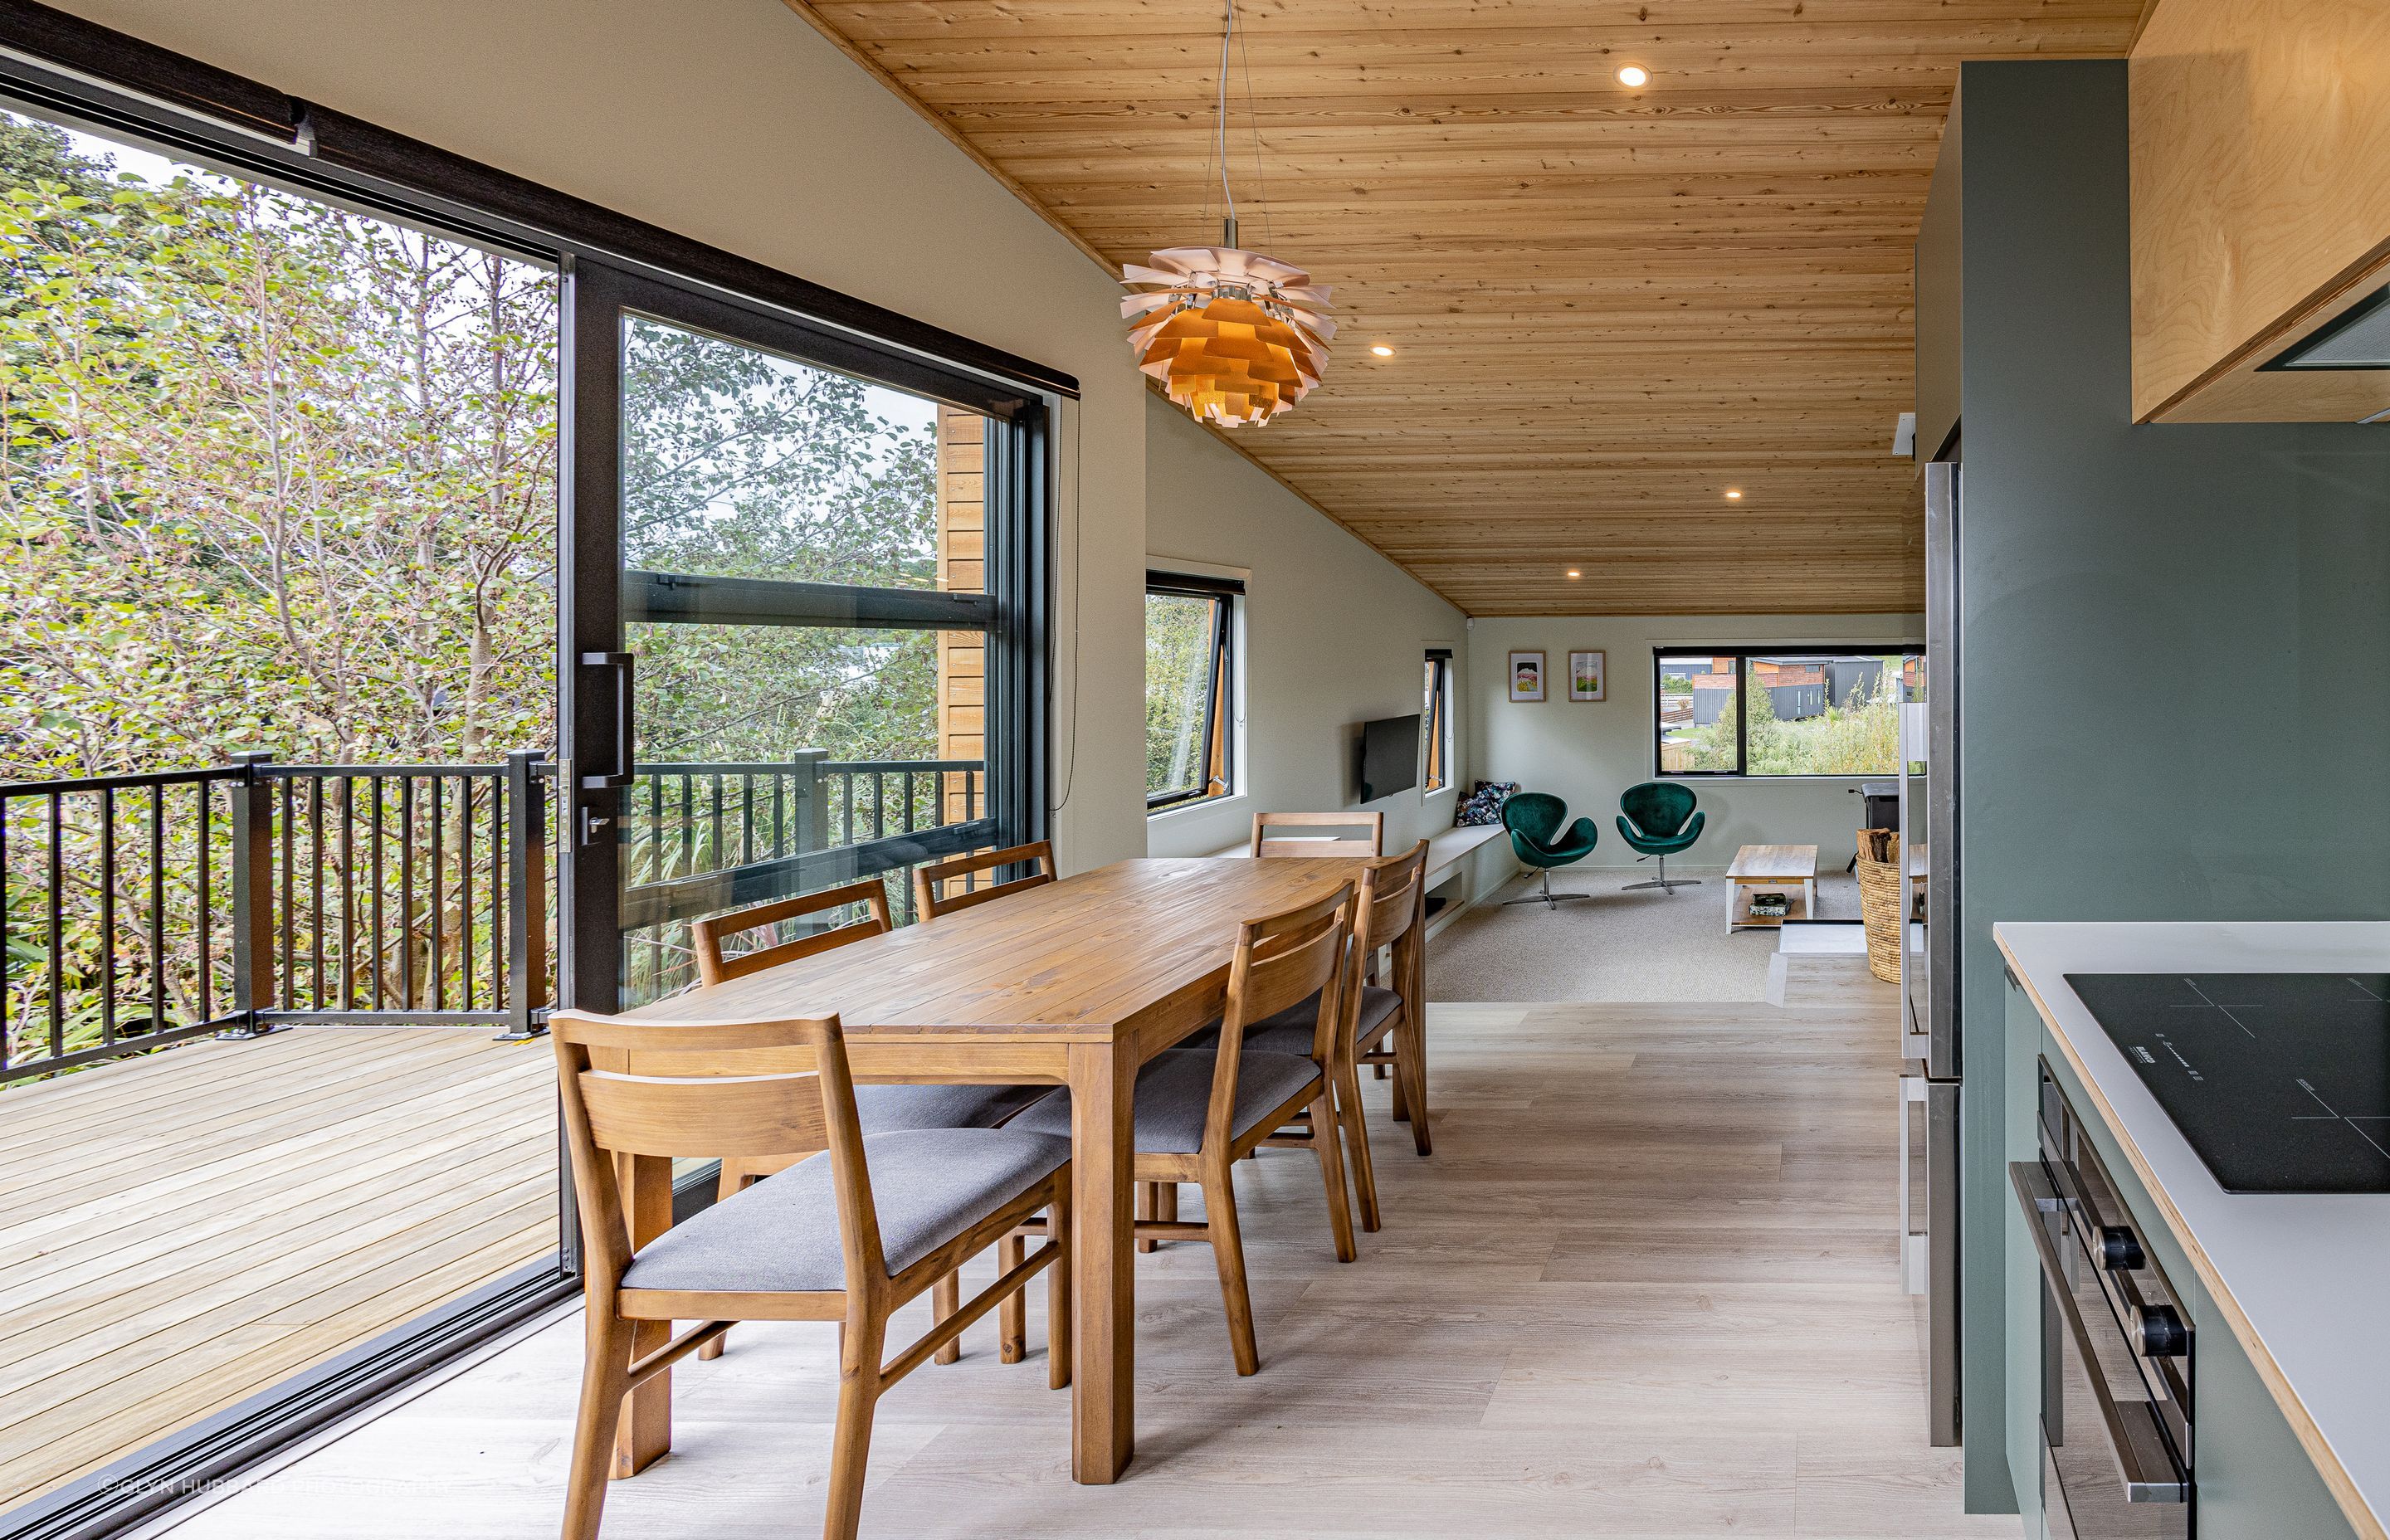 The north-facing deck off the kitchen with spectacular views to Ruapehu.